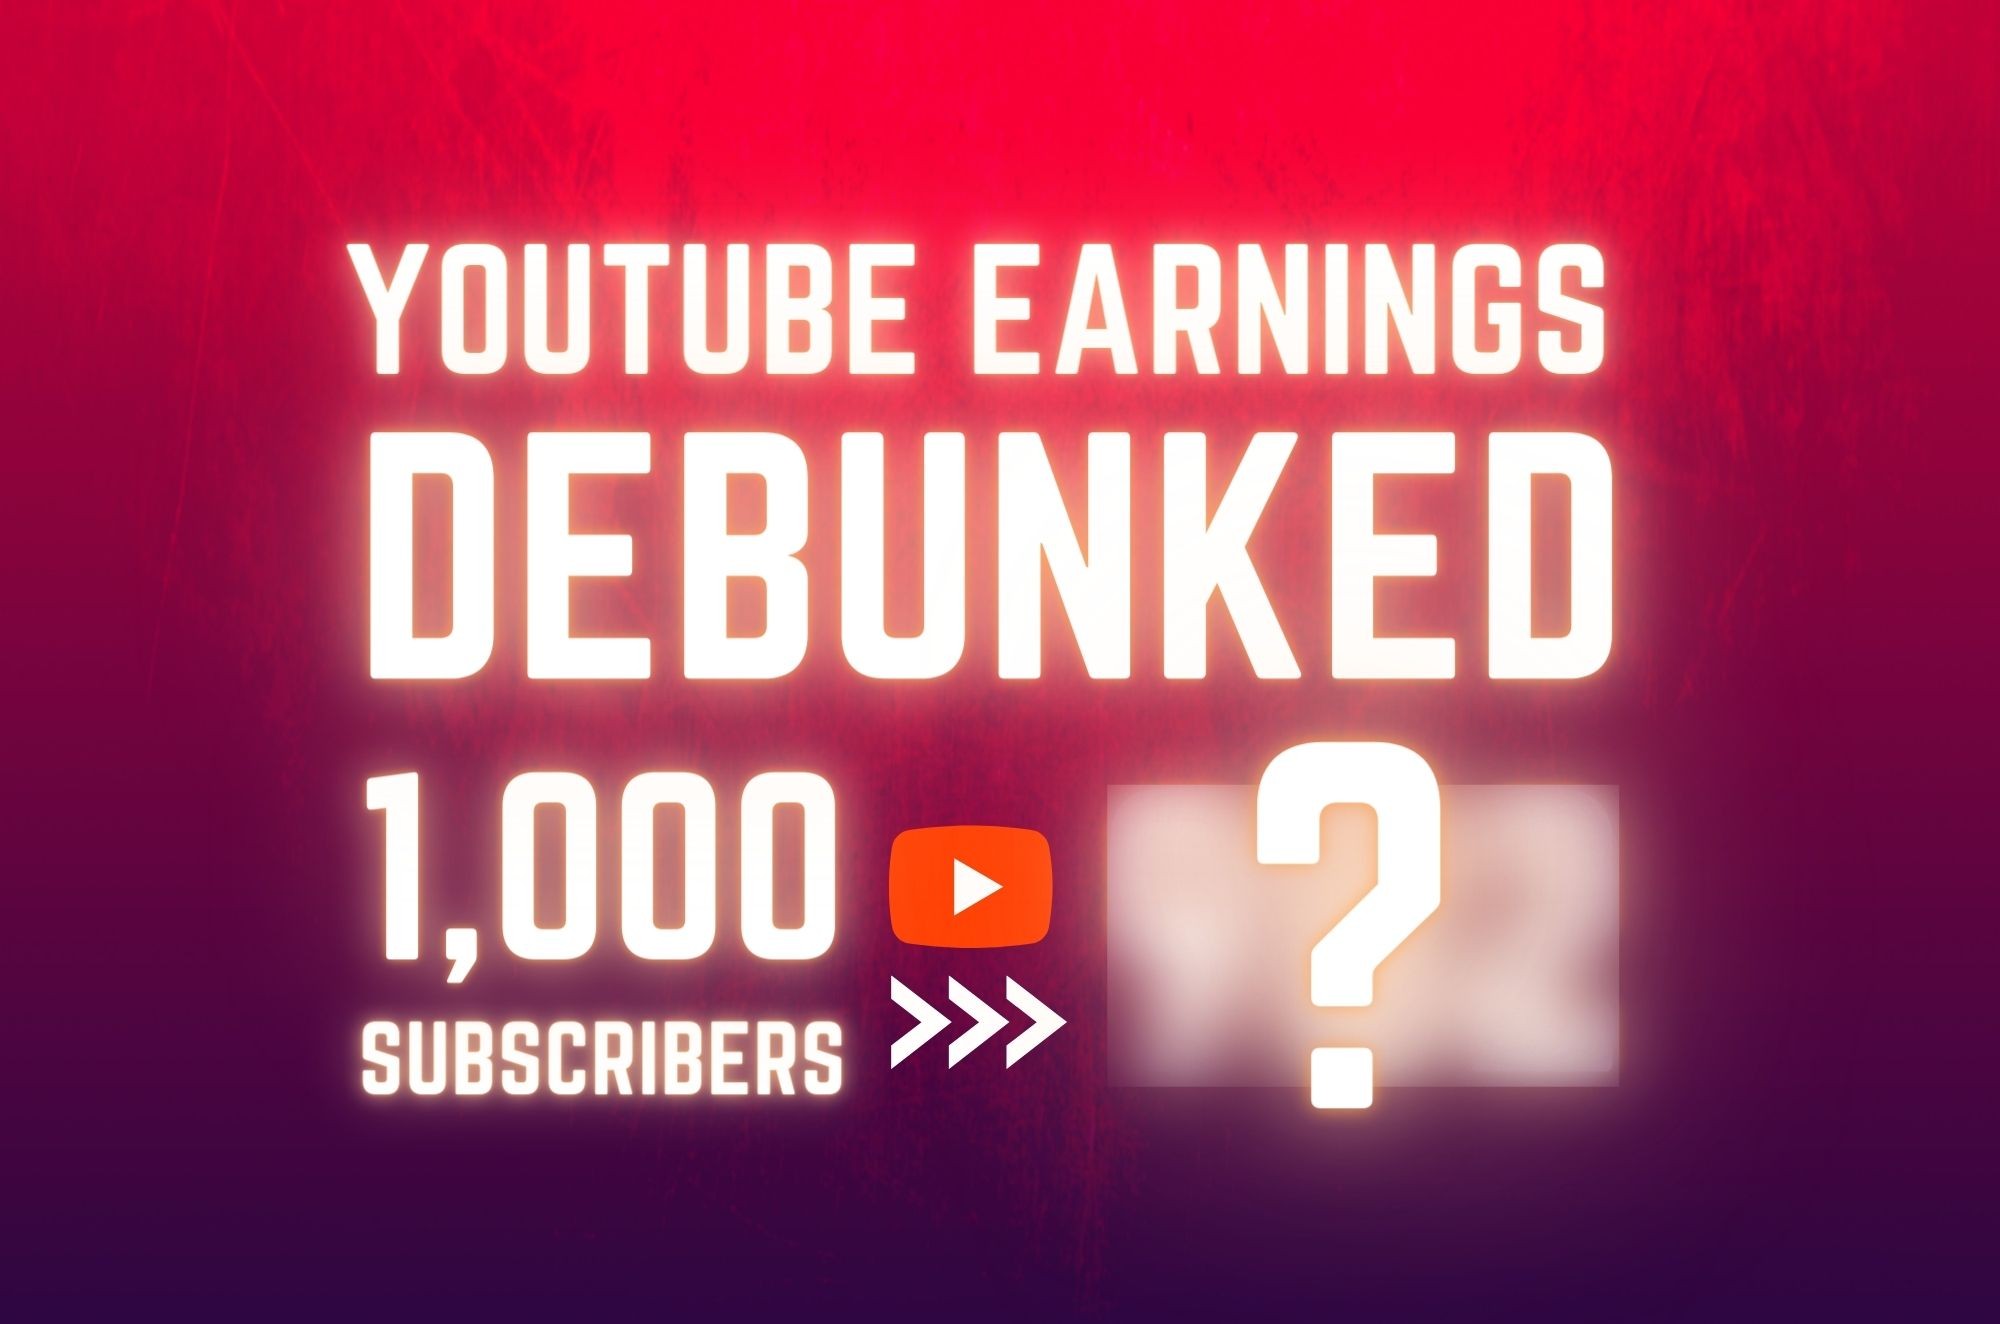 How Much Money Do You Make on YouTube with 1,000 Subscribers?